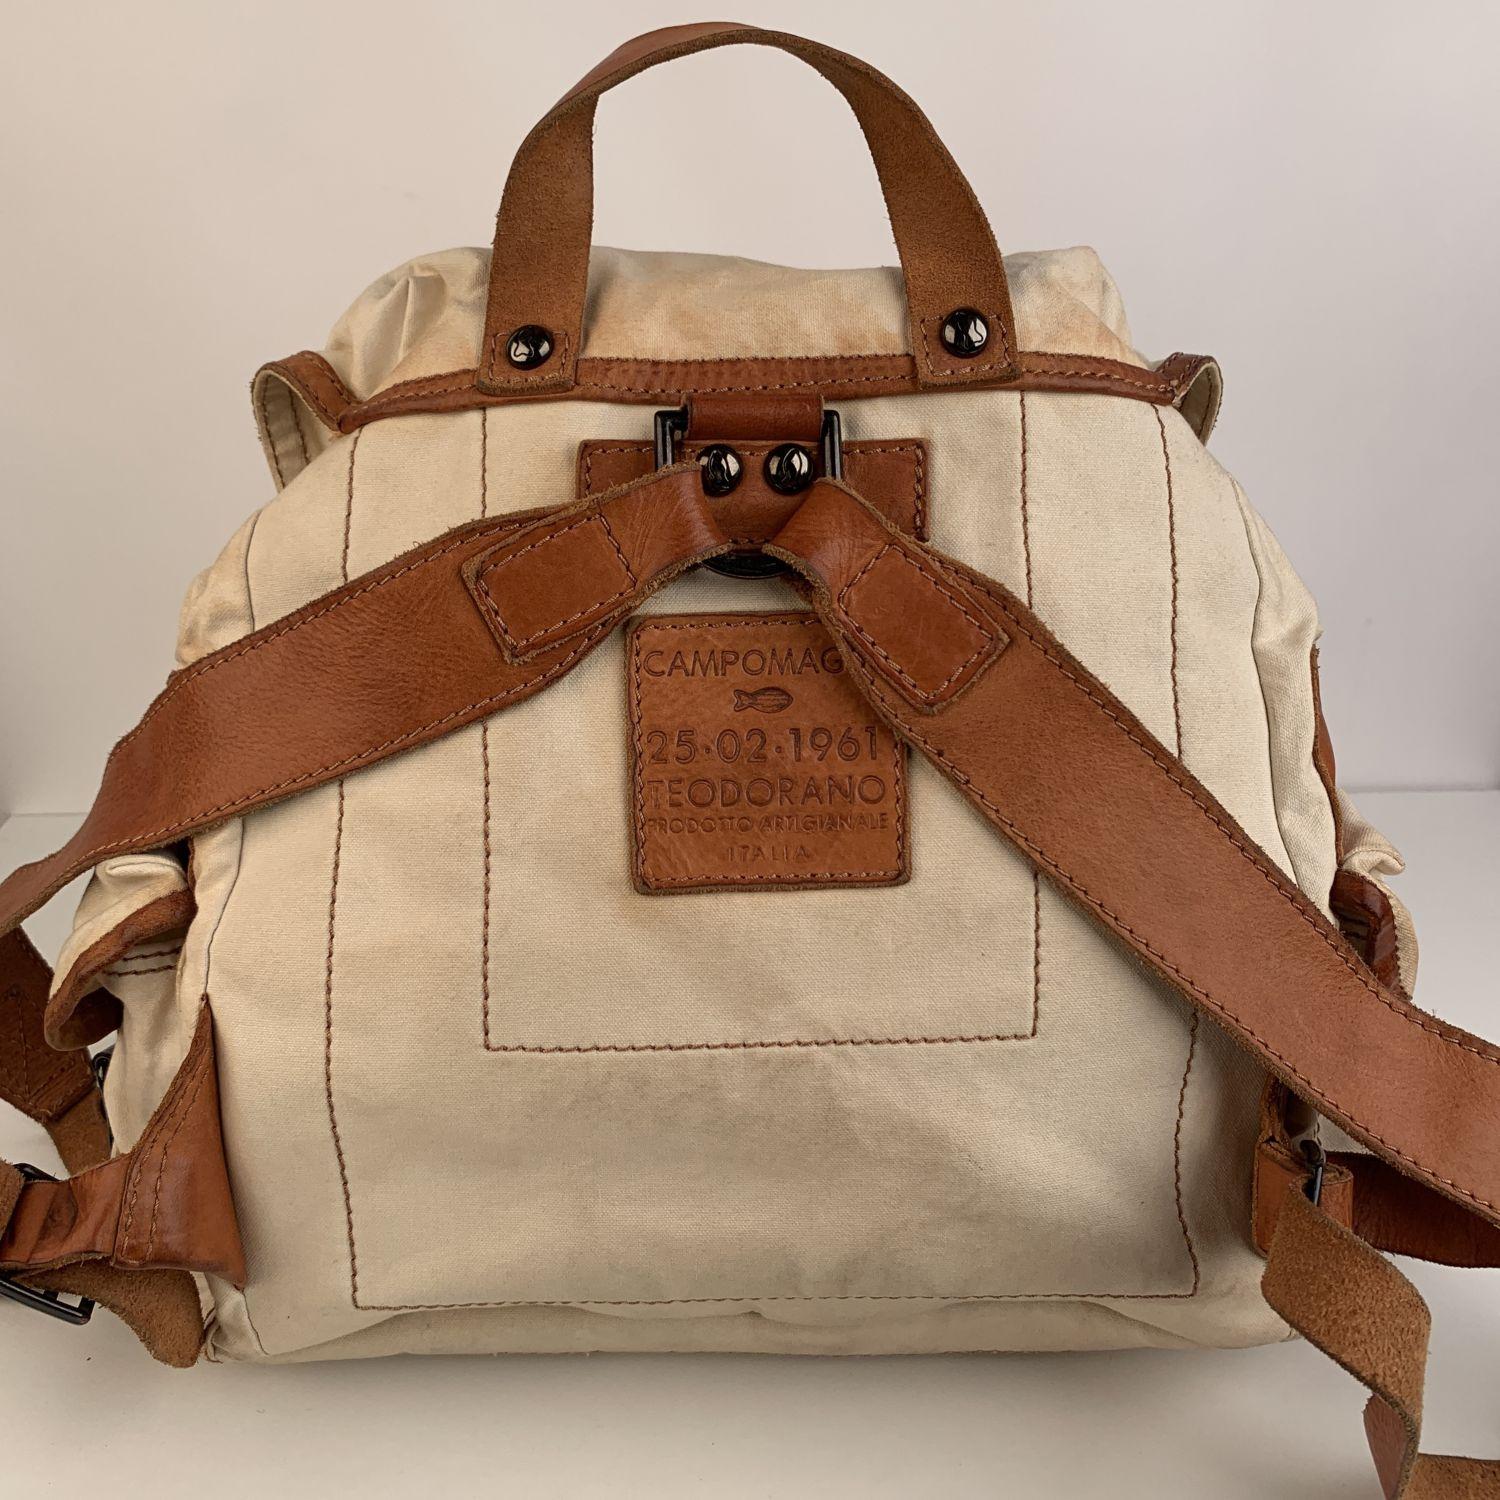 Campomaggi Teodorano Ivory Canvas and Leather Backpack 1